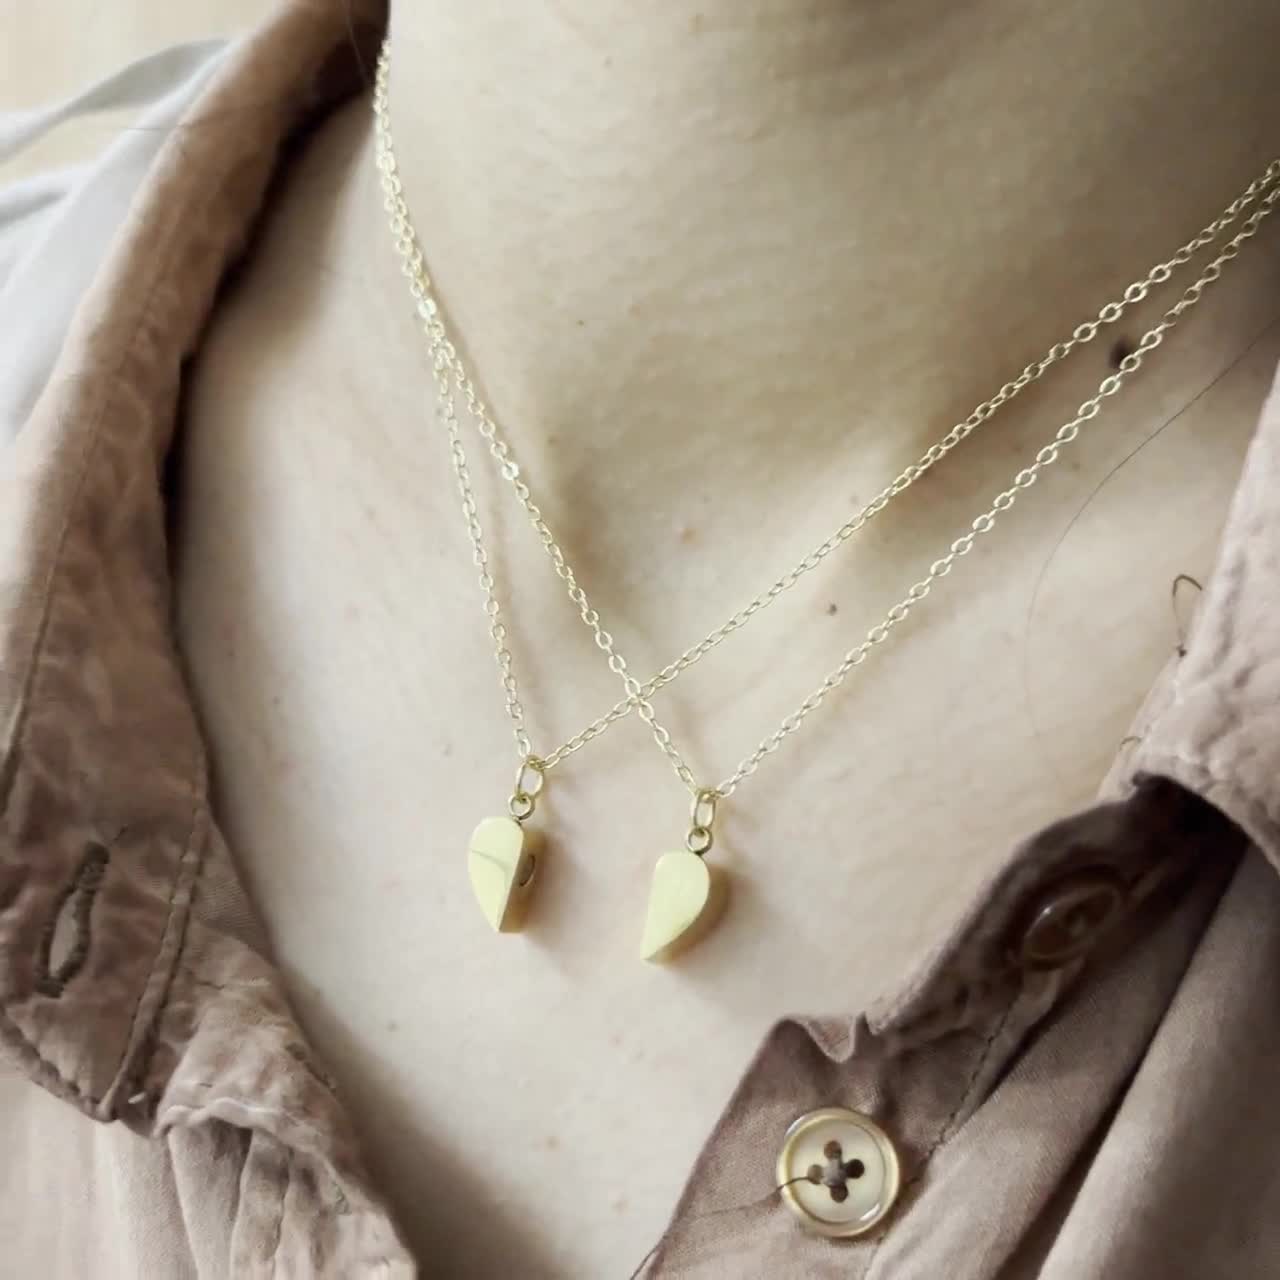 Magnetic Heart Matching Necklace | My Couple Goal 2